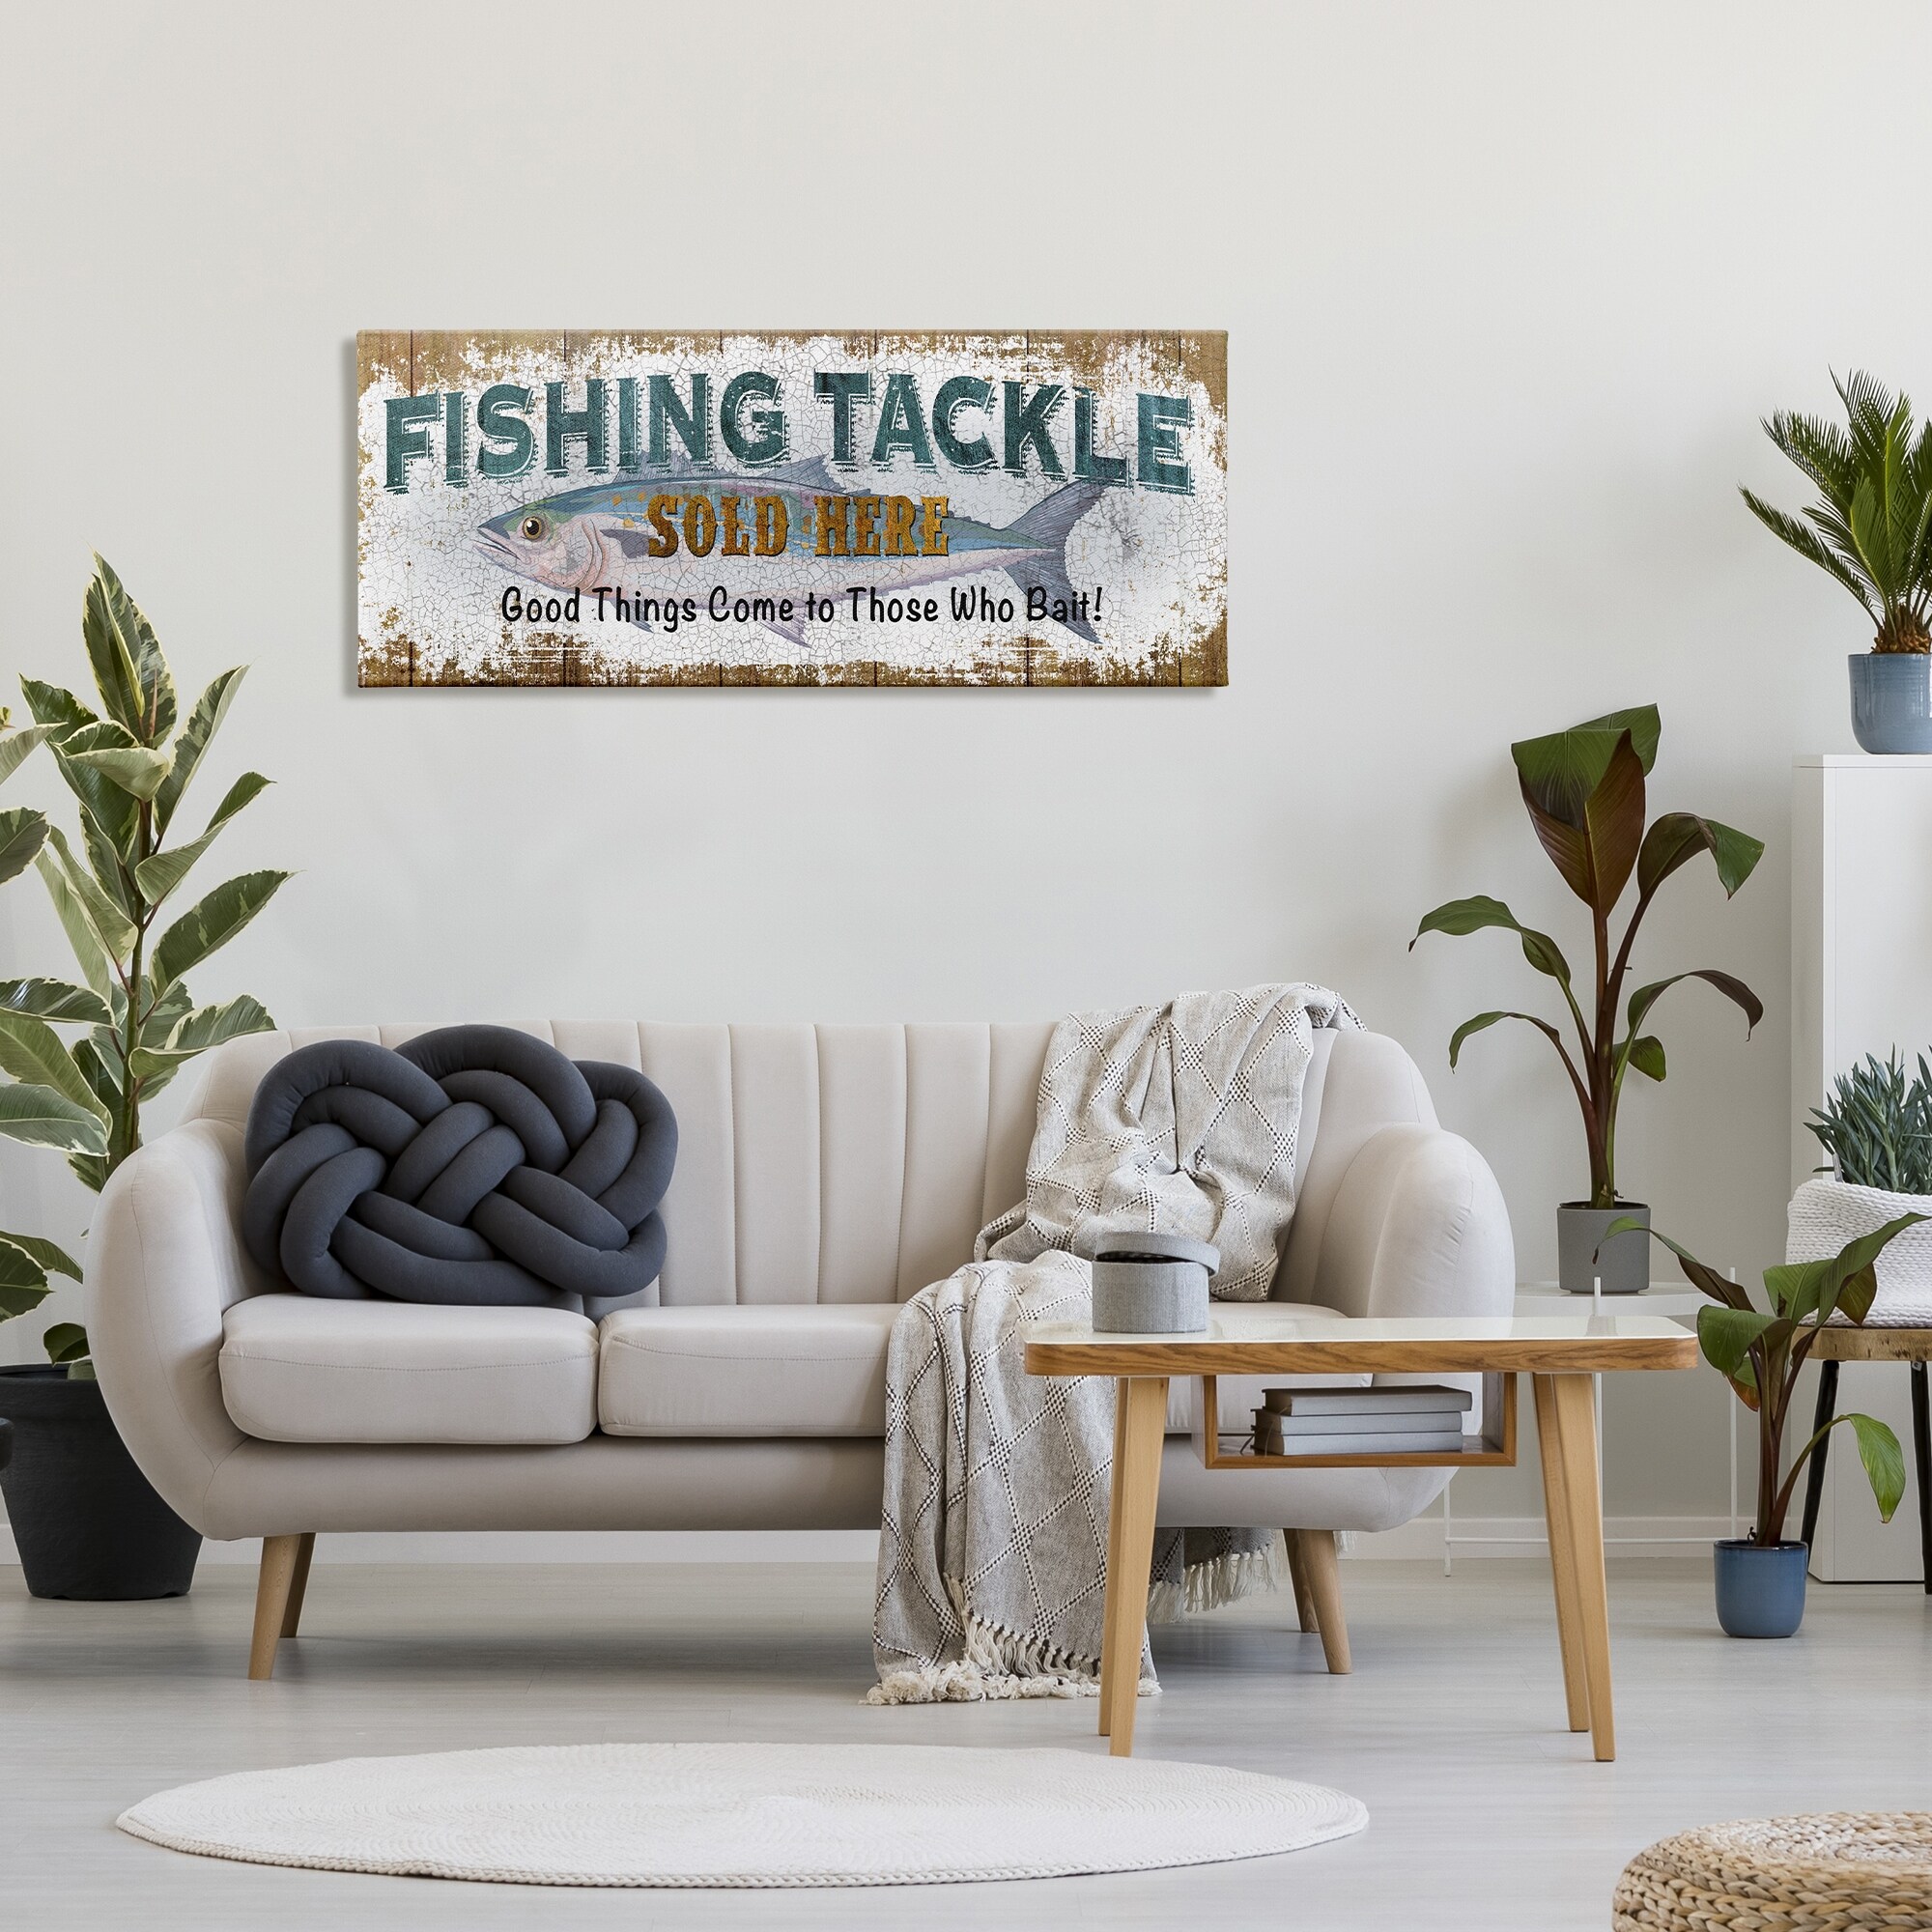 https://ak1.ostkcdn.com/images/products/is/images/direct/43784970af930ea178ed30bbbbb2b752b8c564f2/Stupell-Industries-Rustic-Fishing-Tackle-Sign-Those-Who-Bait-Phrase-Canvas-Wall-Art.jpg